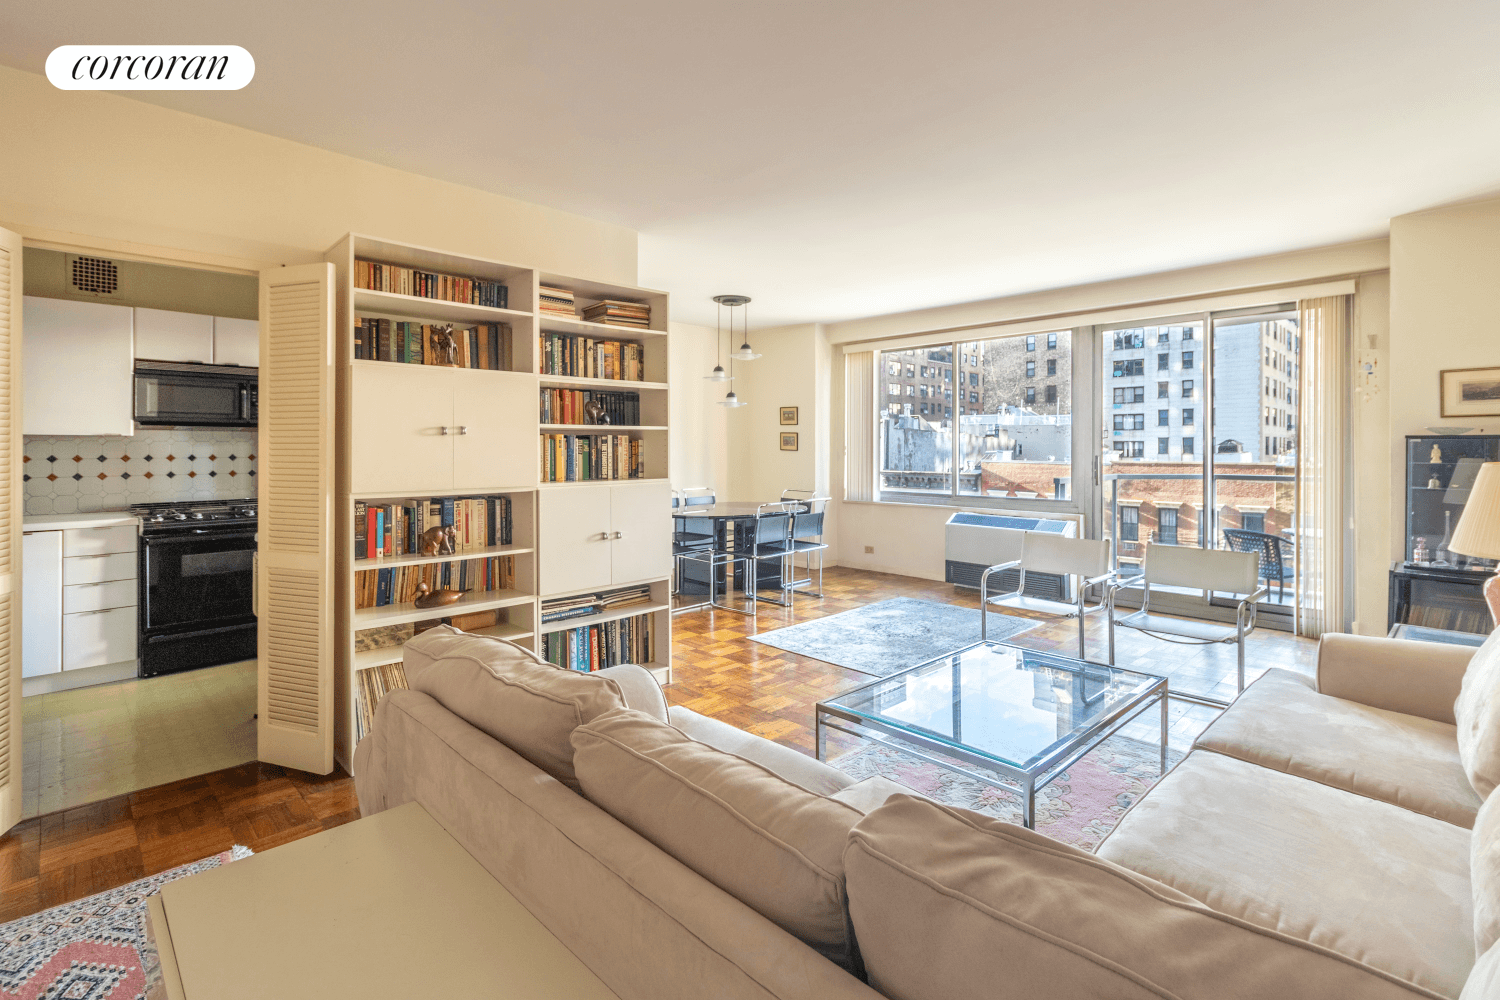 Step into this huge one bedroom, one and one half bath apartment and you'll immediately appreciate the oversize living room, the wall of windows with beautiful Western views, and the ...